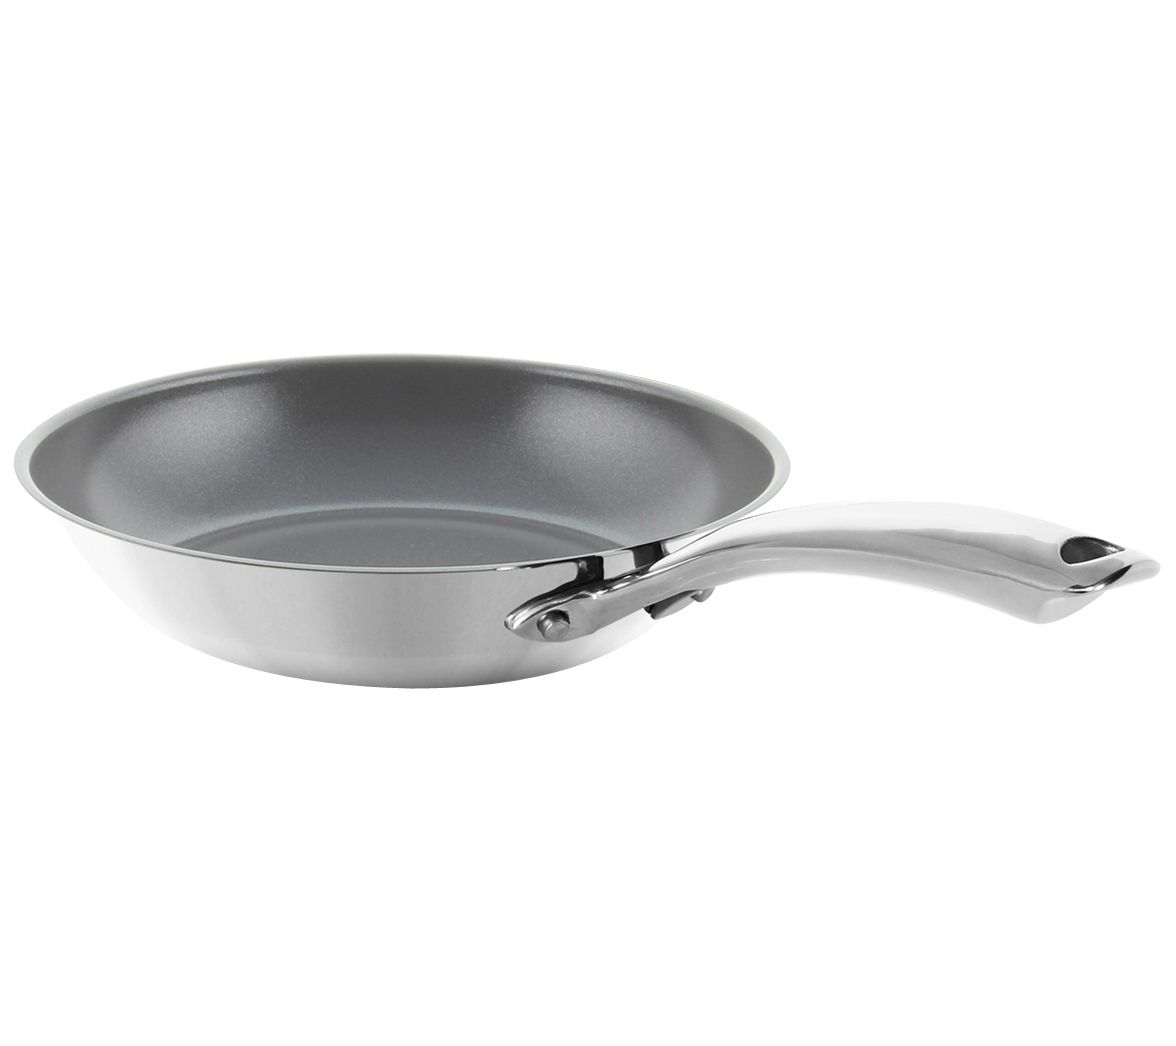 8 Inch Frying Pan with Ceramic Coating Nonstick pan Fried Egg Beef